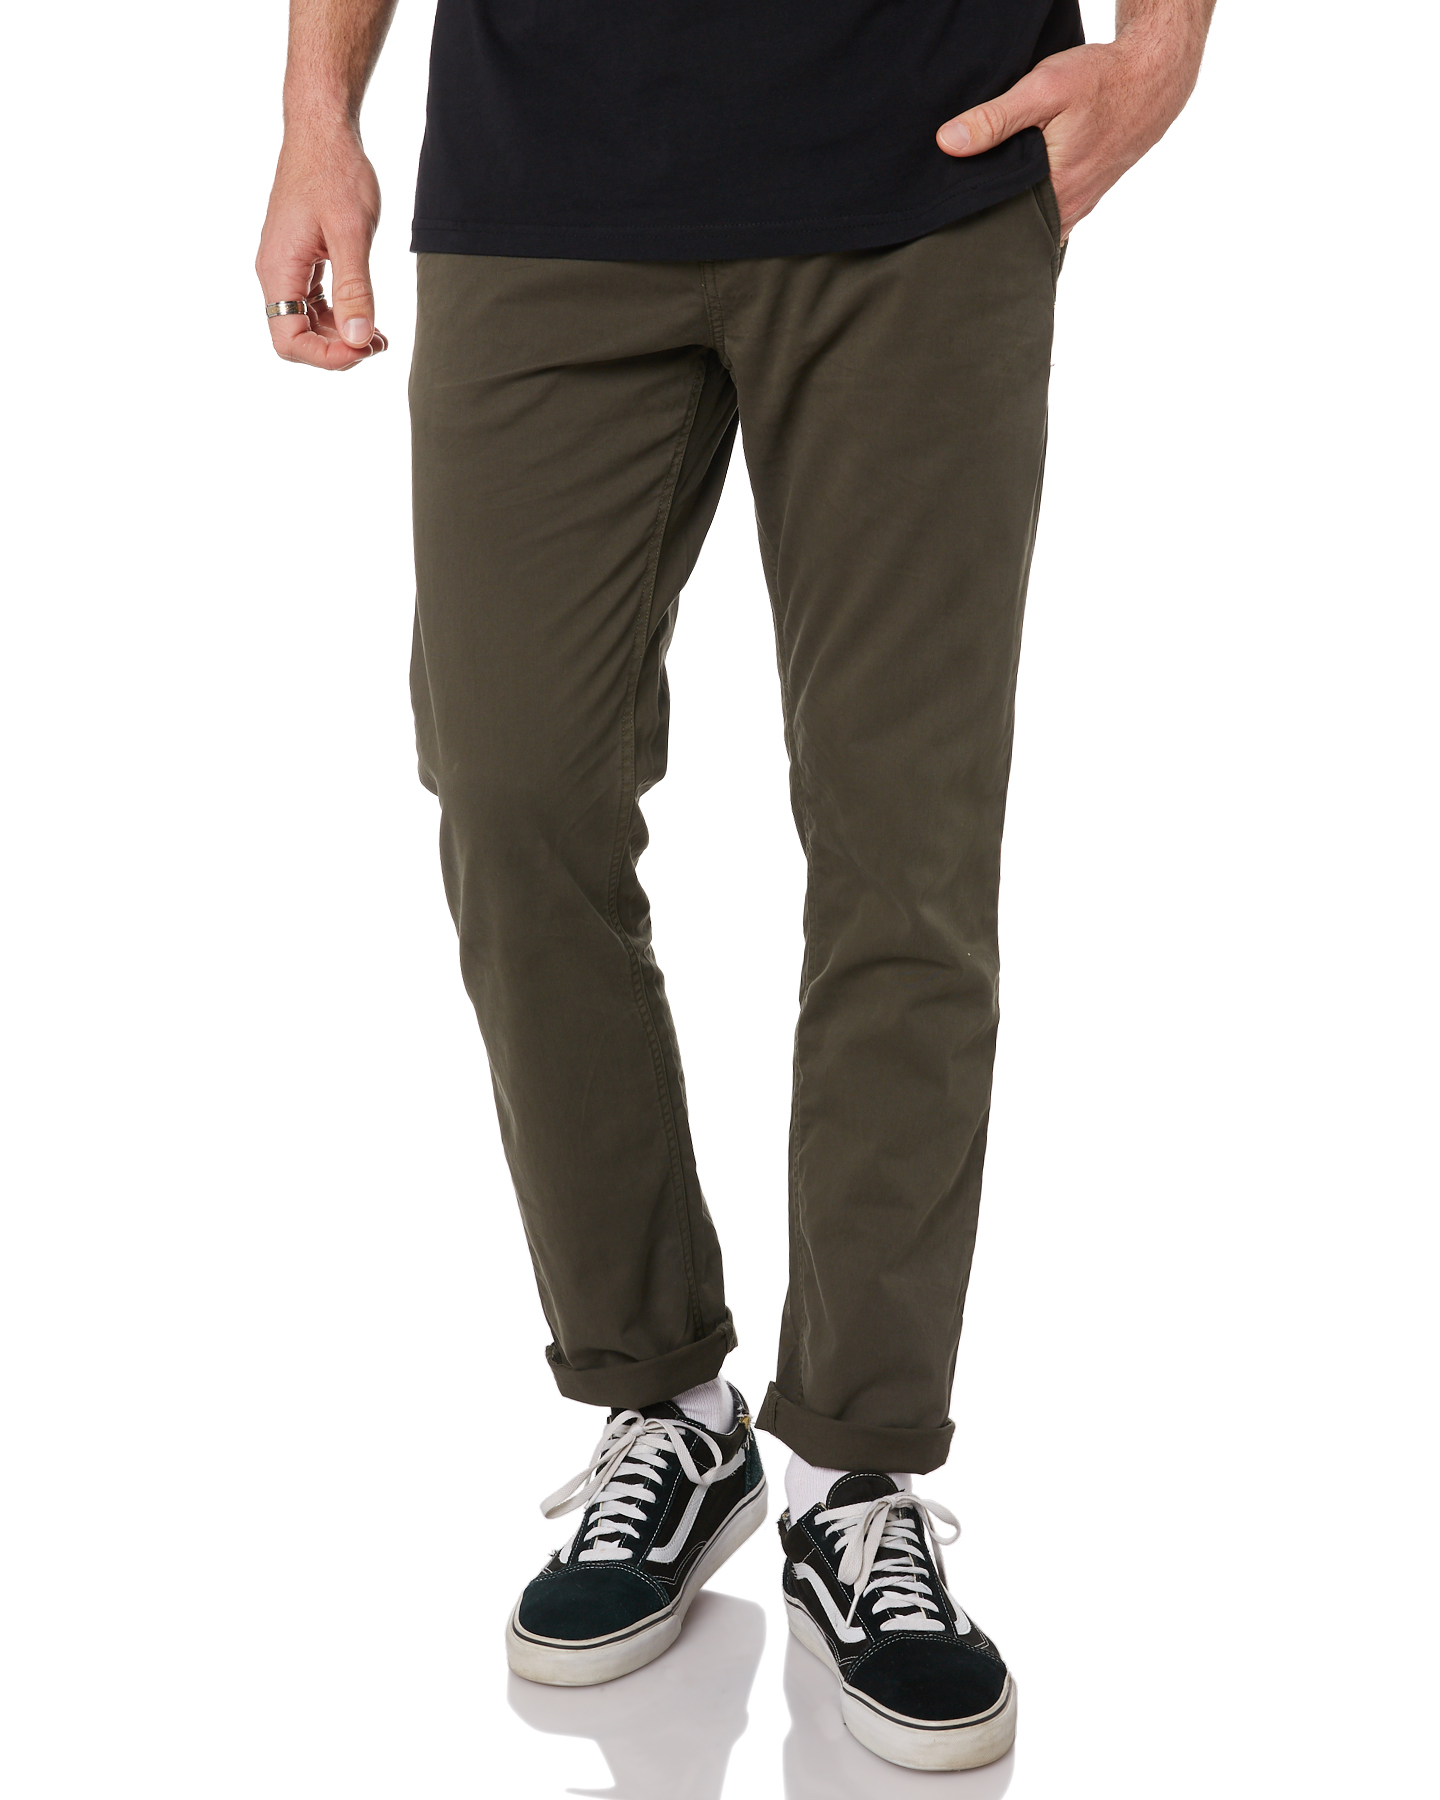 Rip Curl Savage Straight Mens Pant - Mid Green | SurfStitch